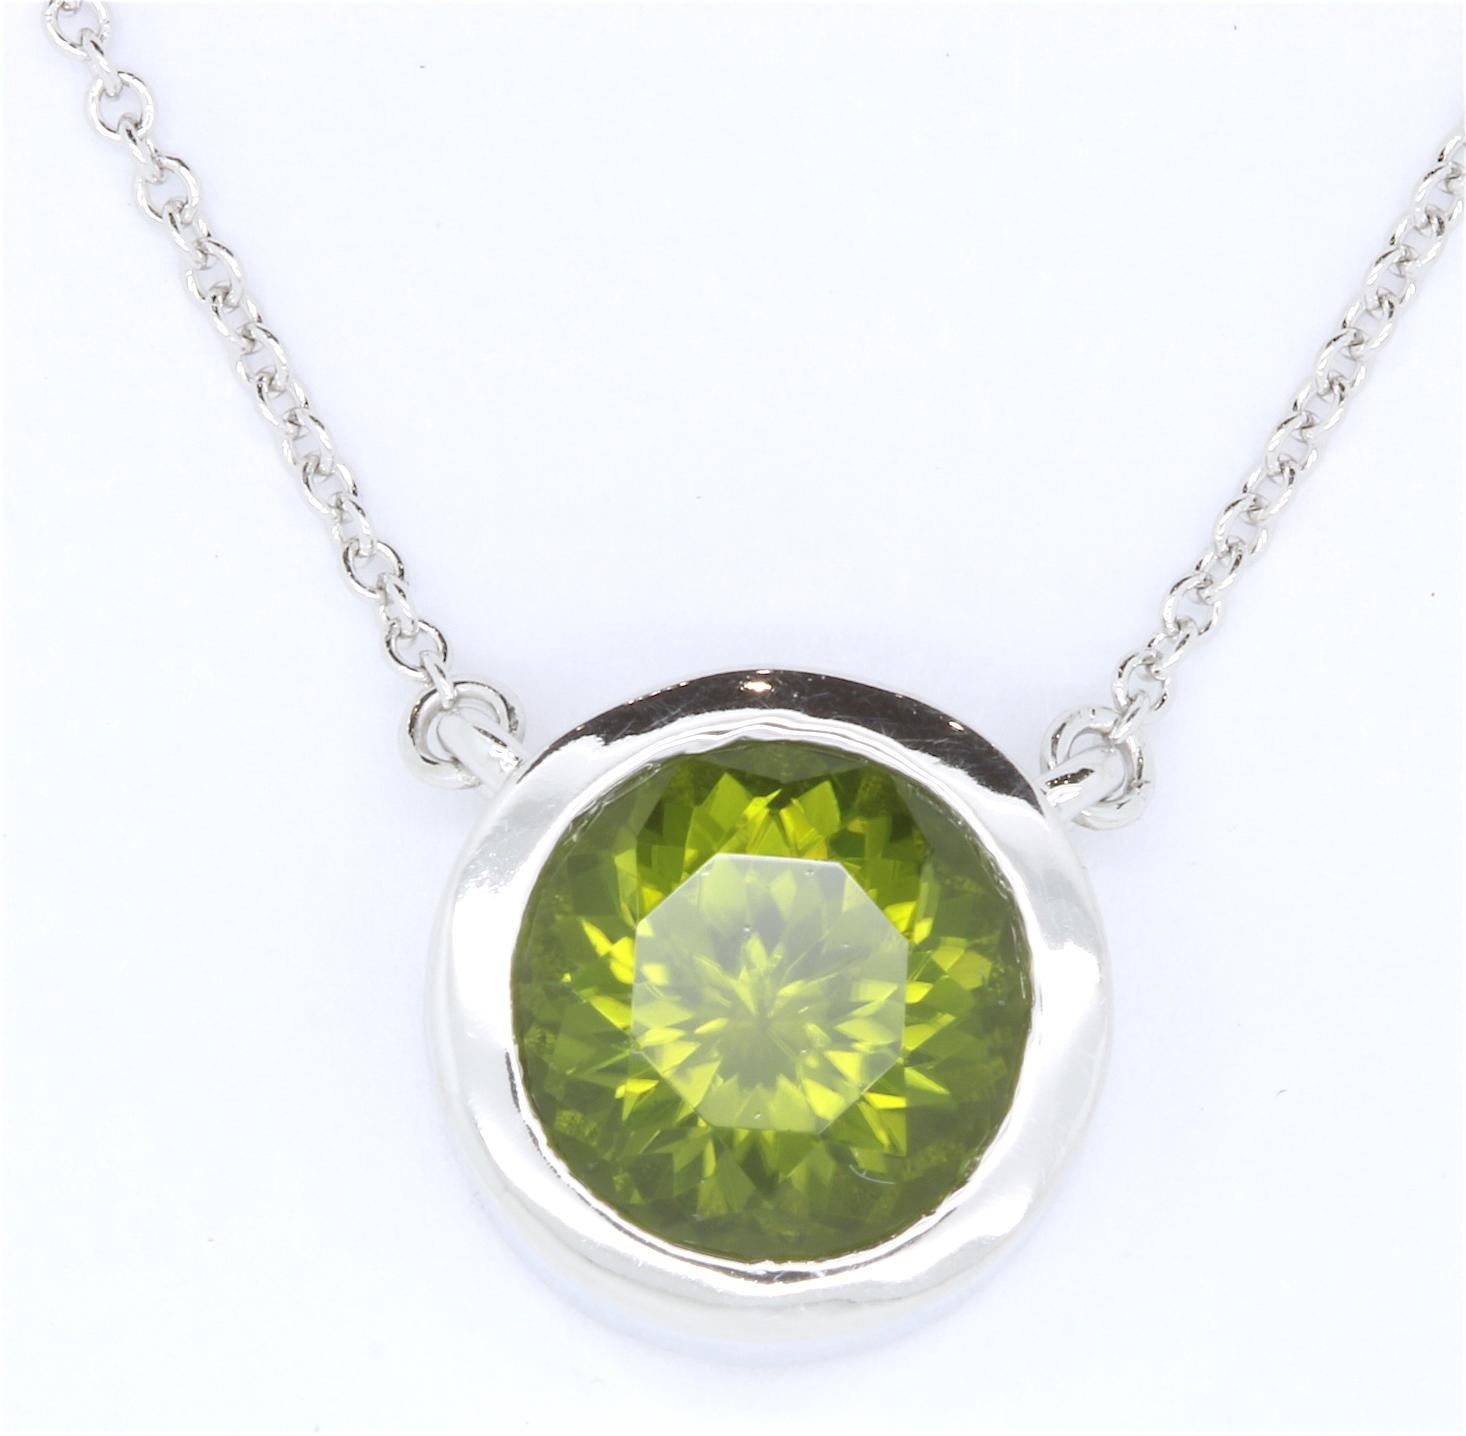 Simple and Stunning, this 3.19 carat Peridot stone is set in a 14K White Gold Bezel setting.

Material: 14k White Gold
Center Stone Details: 3.19 Carat Peridot 
Chain: 18 inches

Fine one-of-a-kind craftsmanship meets incredible quality in this